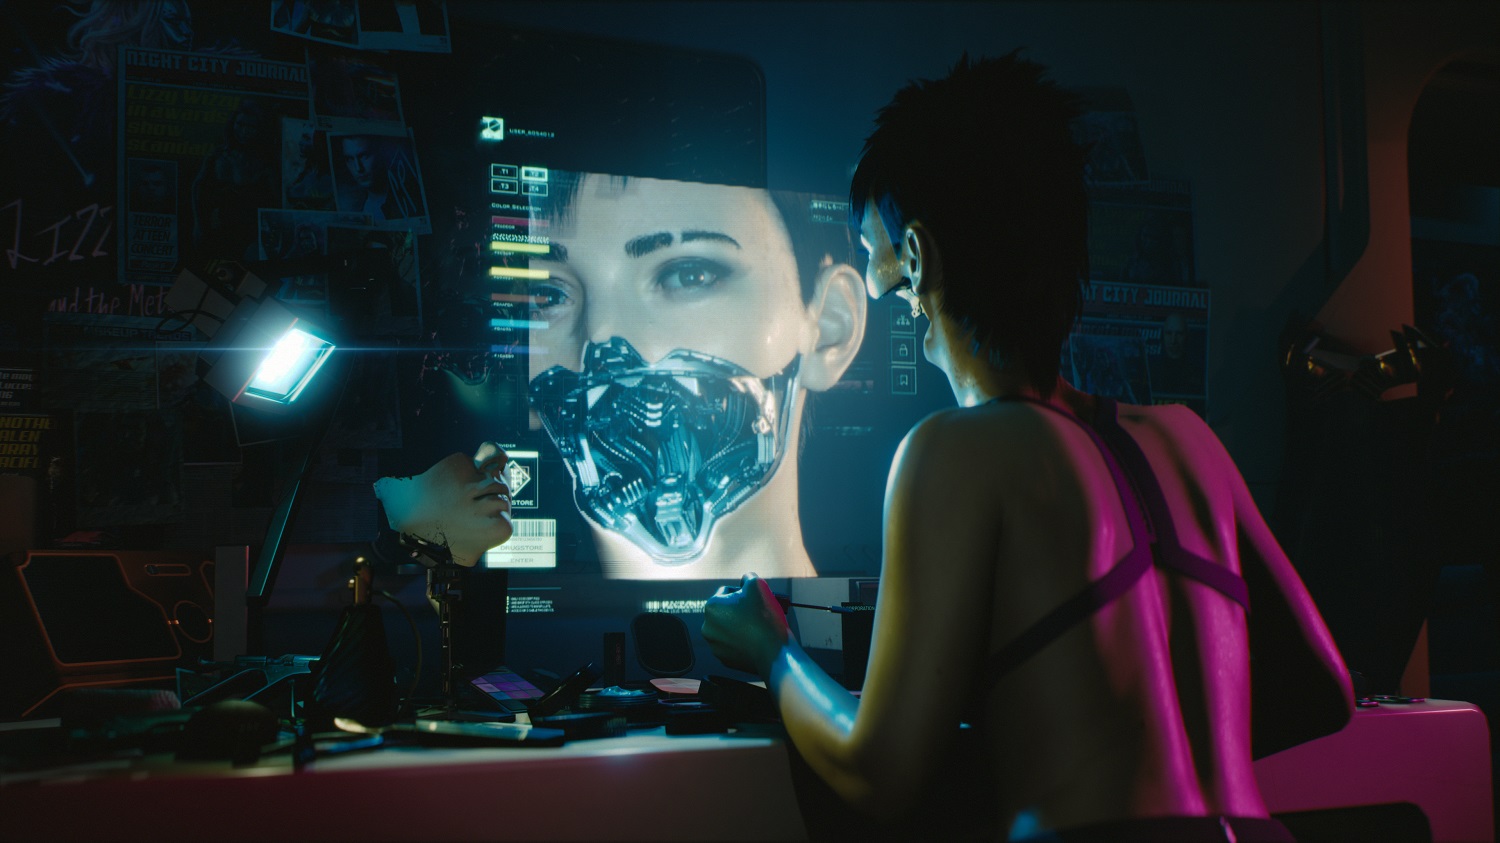 Cyberpunk 2077 HDR ReShade Improves Depth, Color and Visual Effects